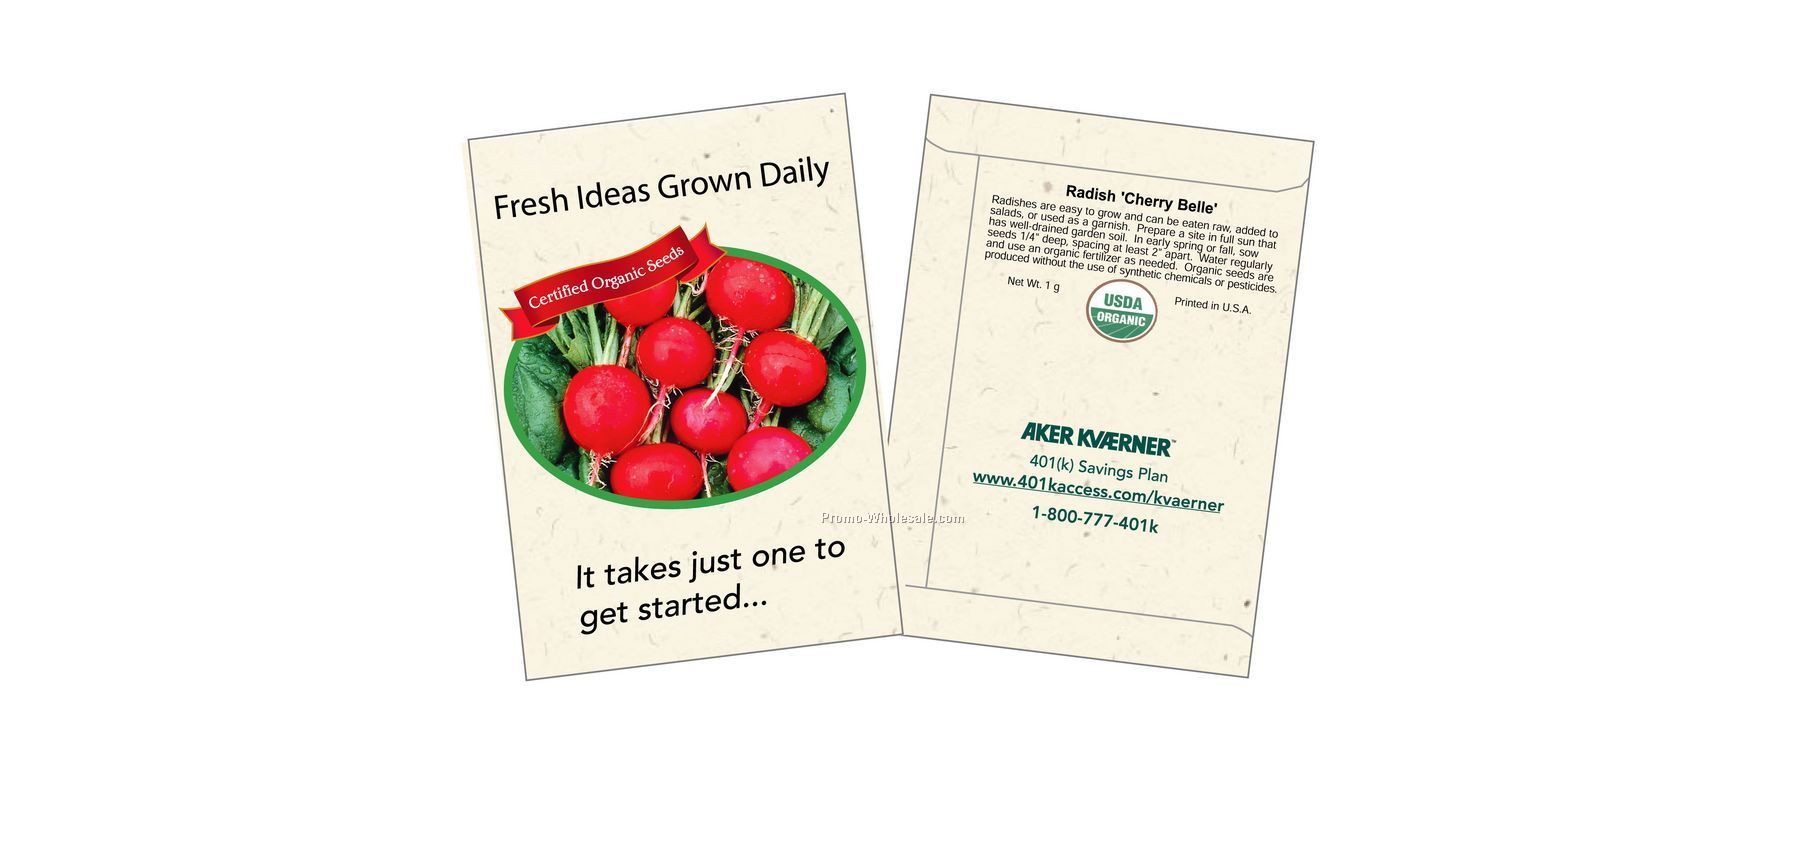 3-1/4"x4-1/2" Organic Radish - Cherry Belle - Seed Packets (1 Color)